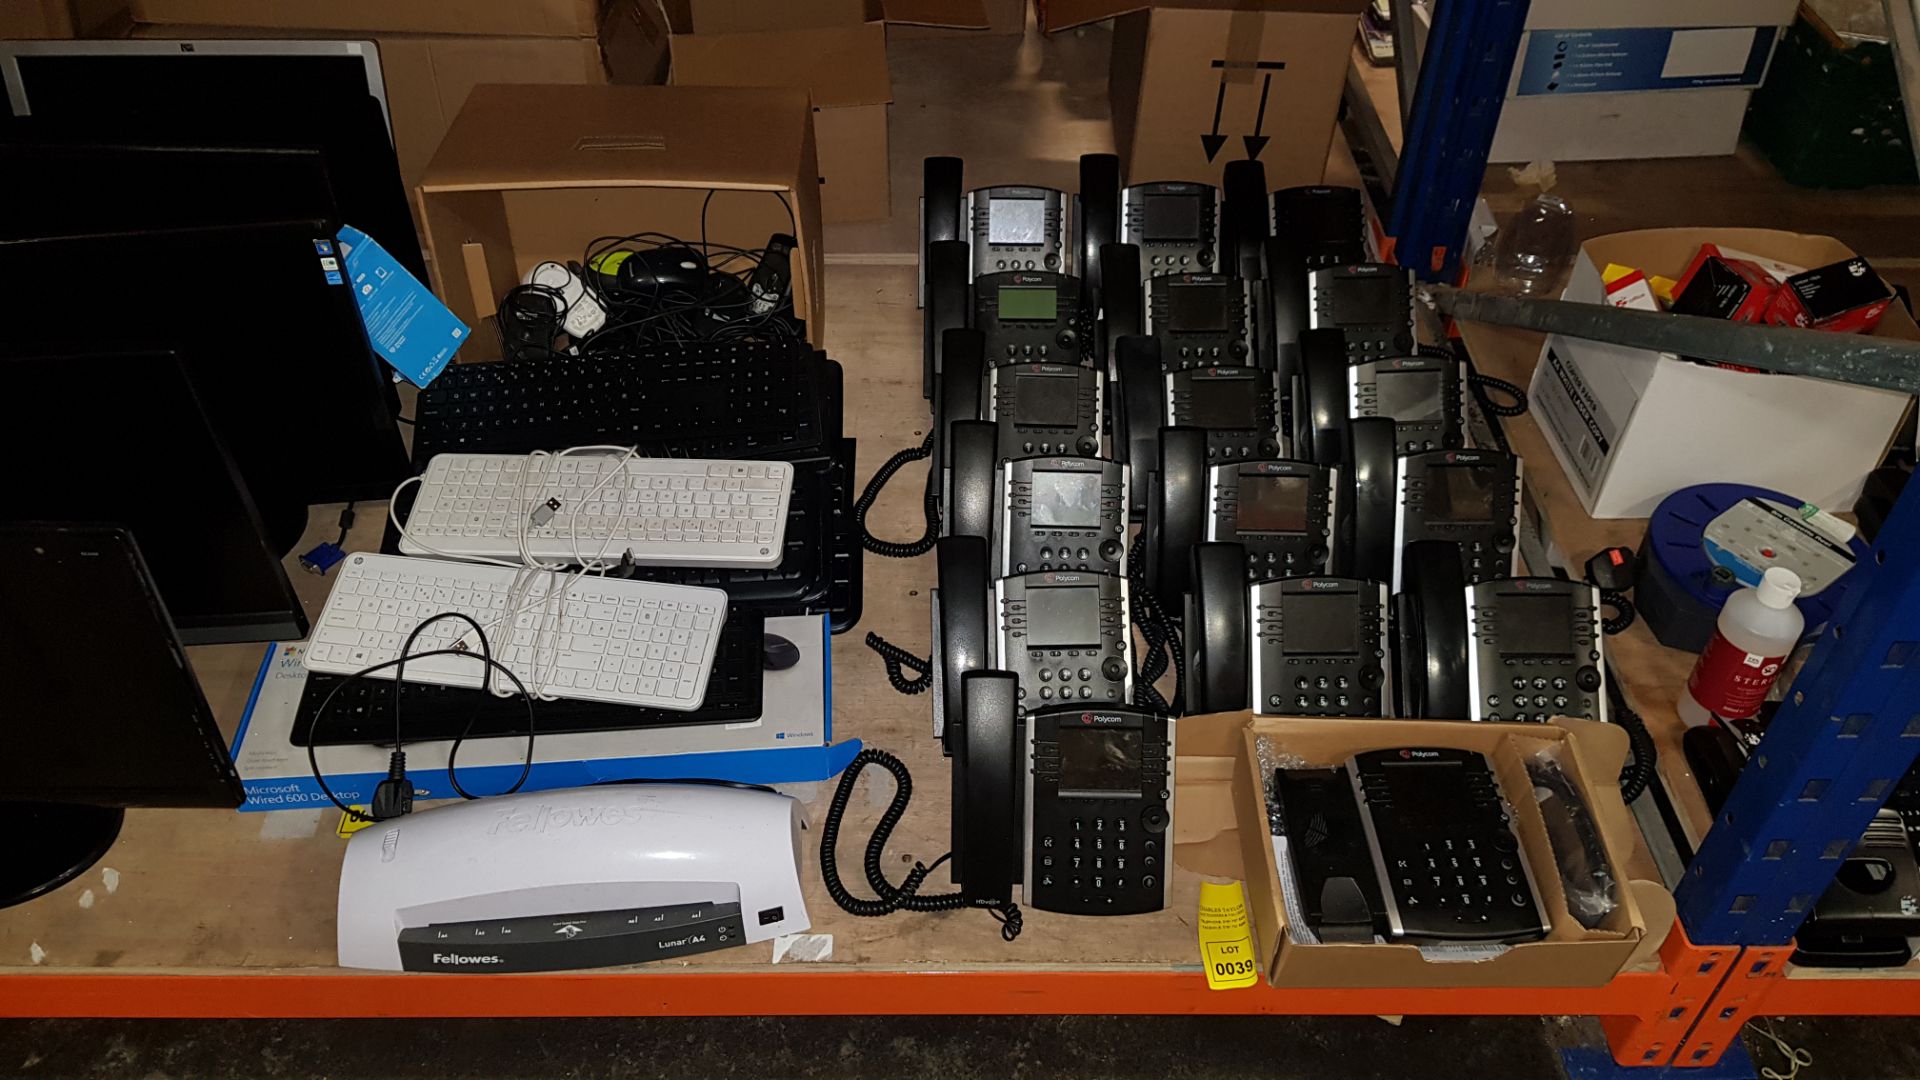 APPROX 40 + PIECE MIXEDOFFICE LOT CONTAINING A LARGE QUANTITY OF POLYCOM OFFICE PHONES, VARIOUS